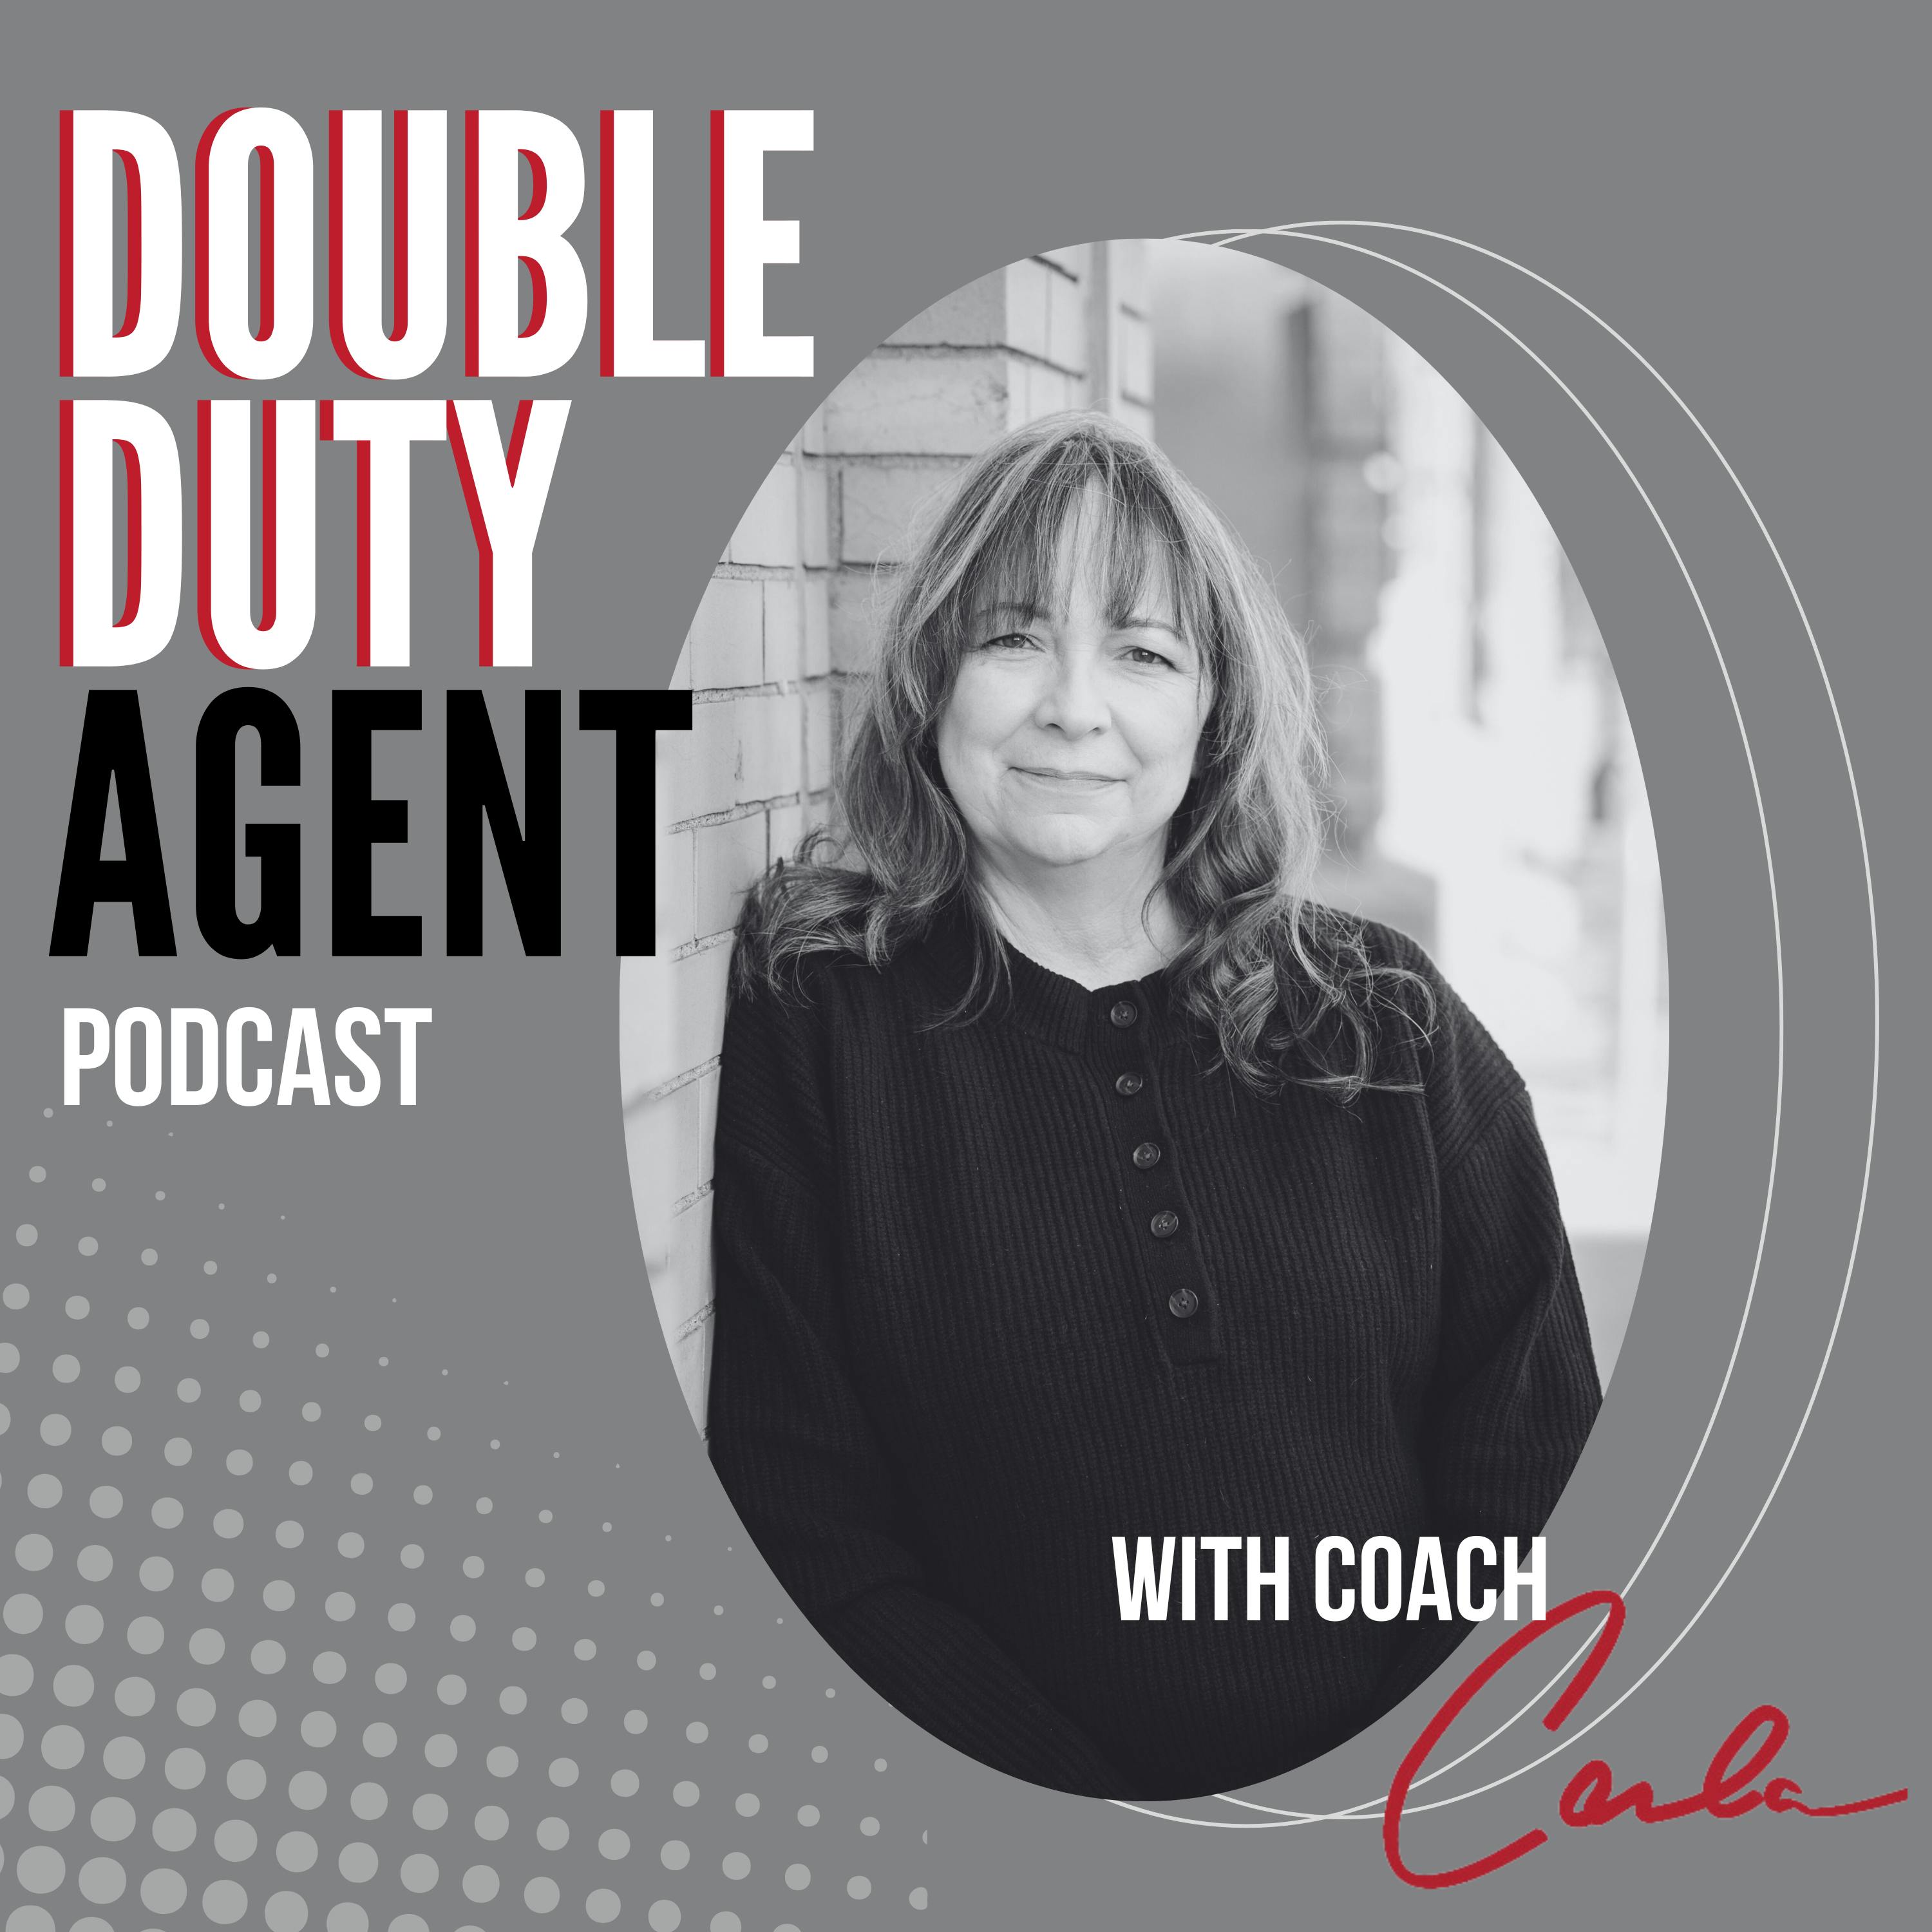 The Double Duty Agent Podcast with Carla Higgins Image